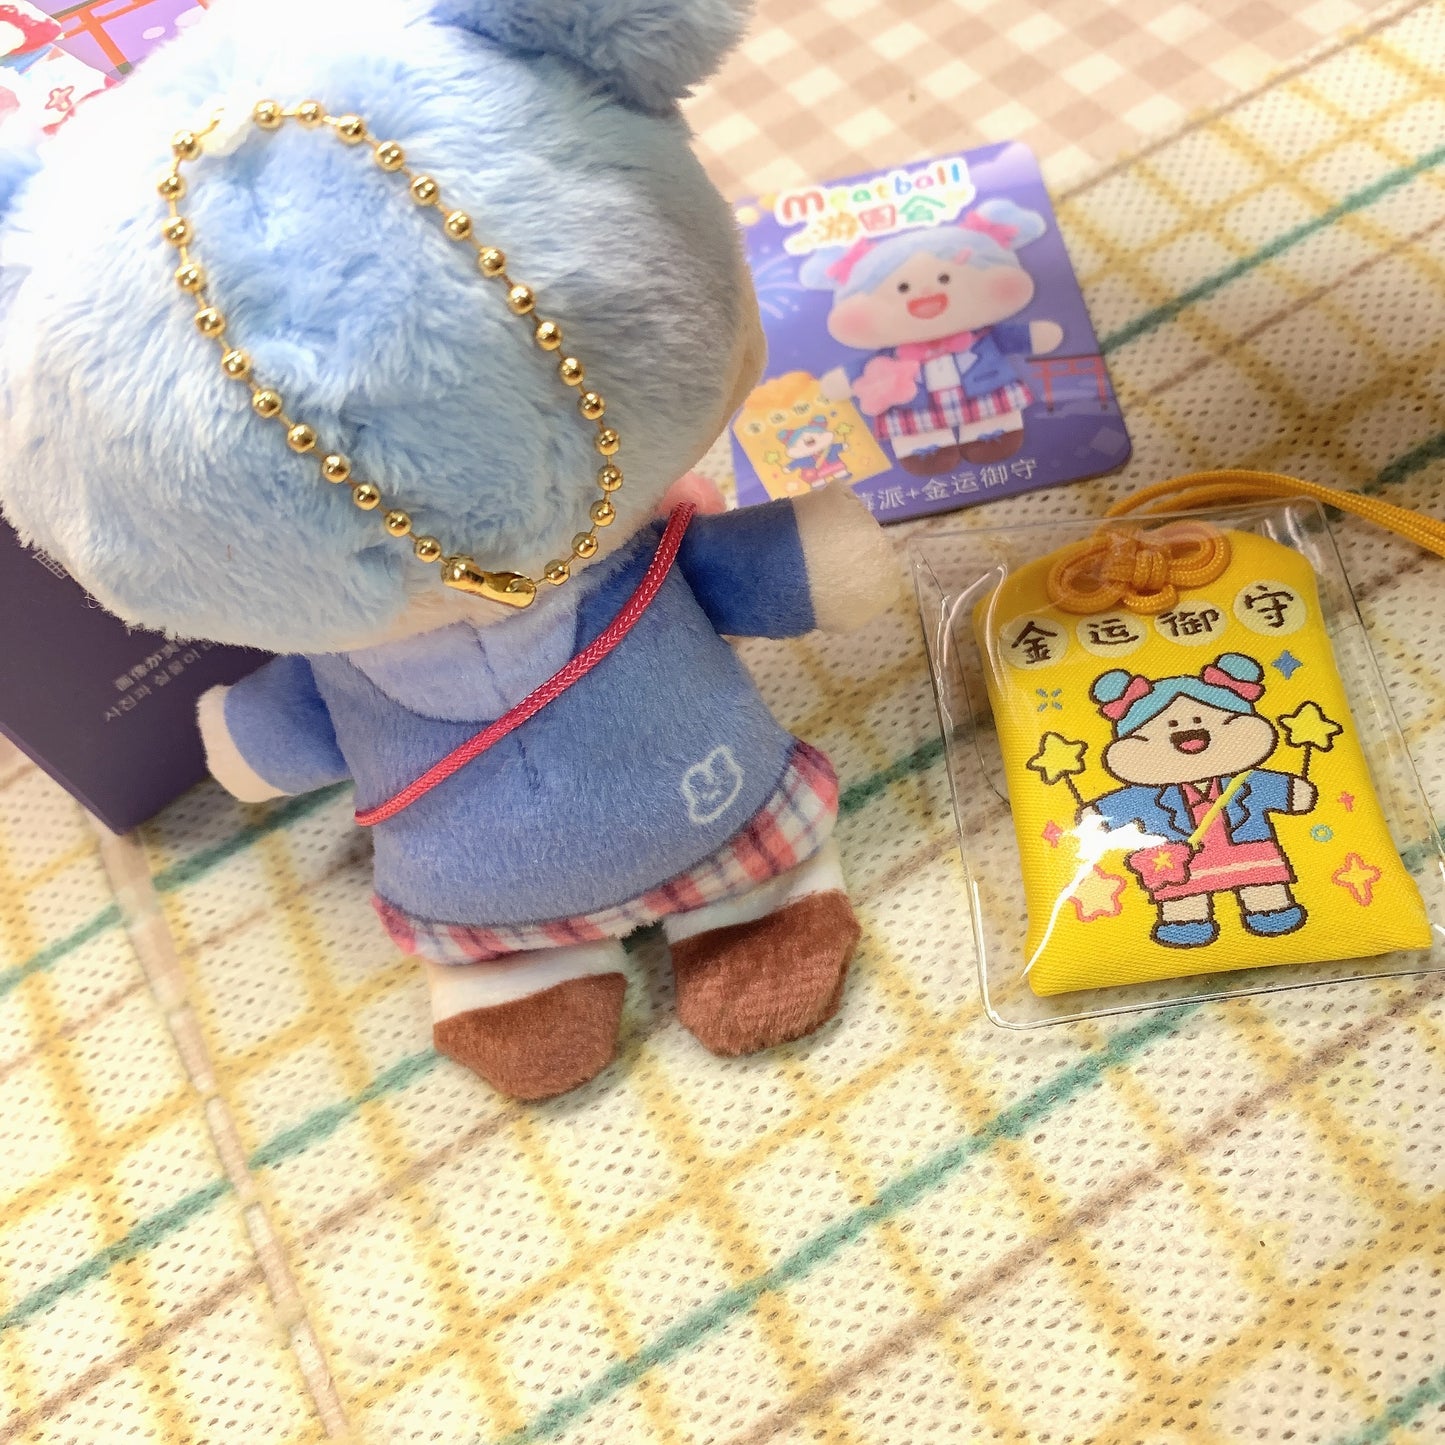 【PRELOVED and SALE 】Meatball blind box toy plush toy with omamori